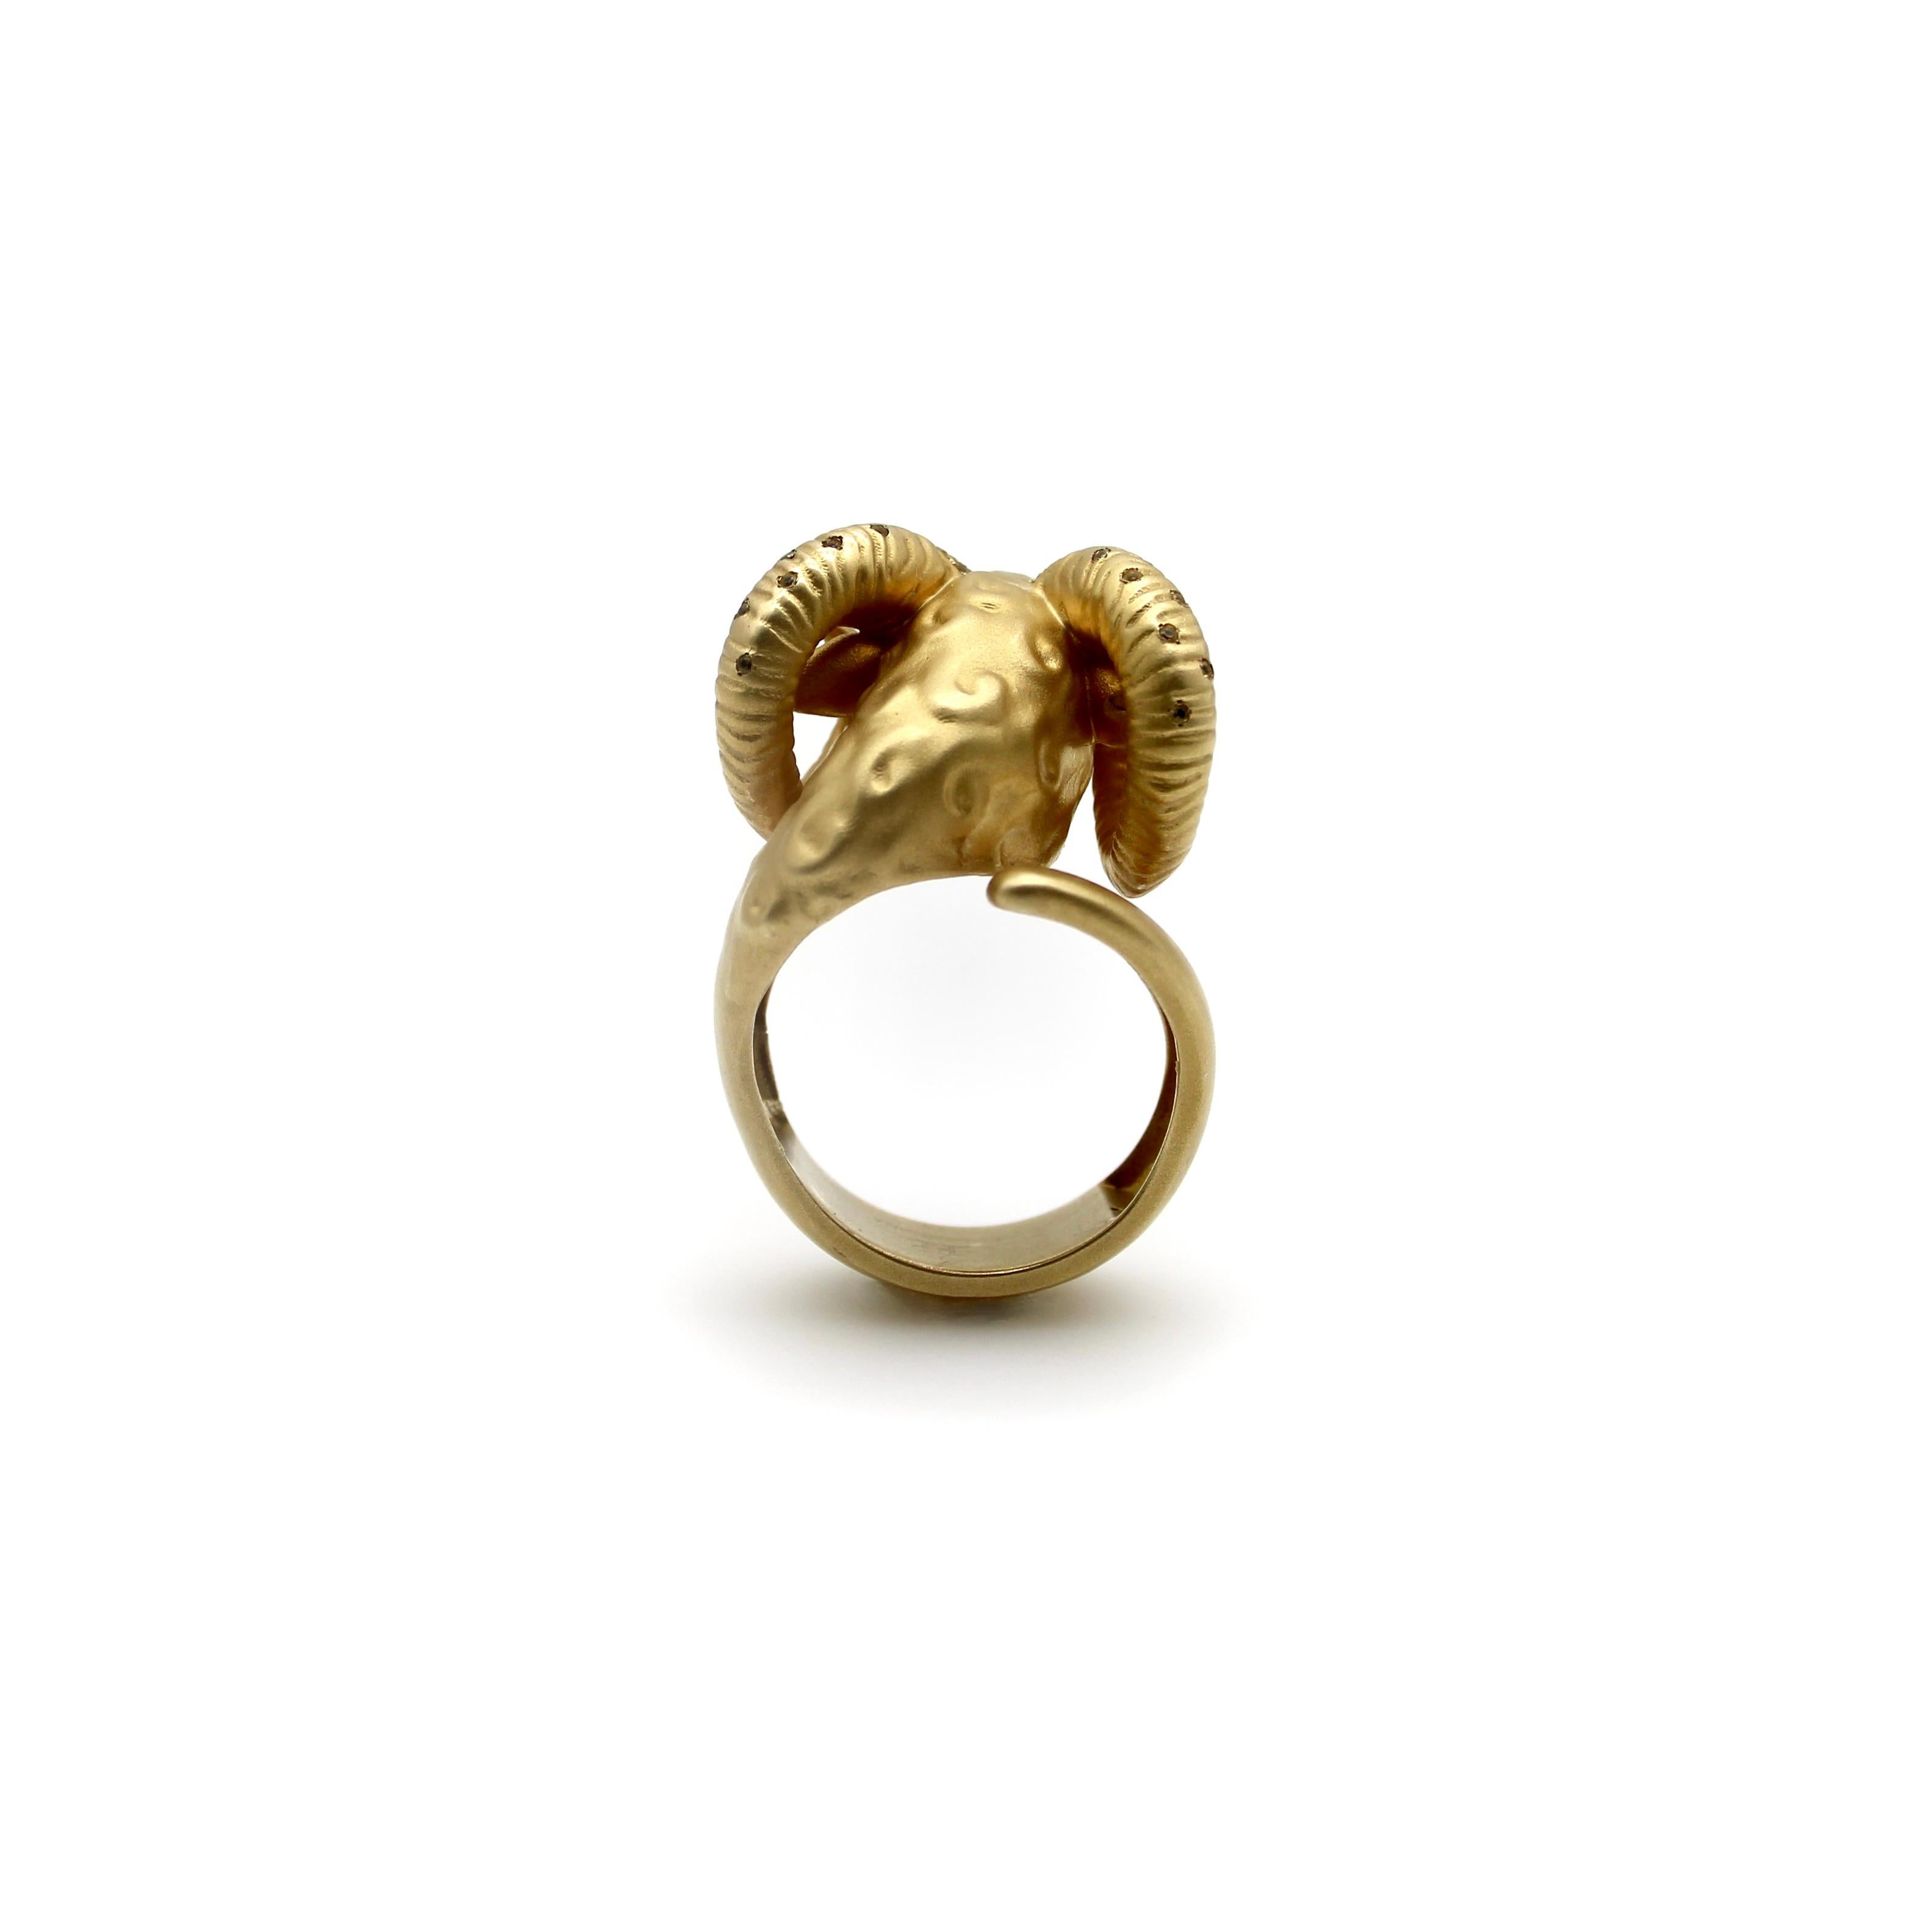 Helannona 14k Gold Ram’s Head Ring with Micro Pave Citrines 1